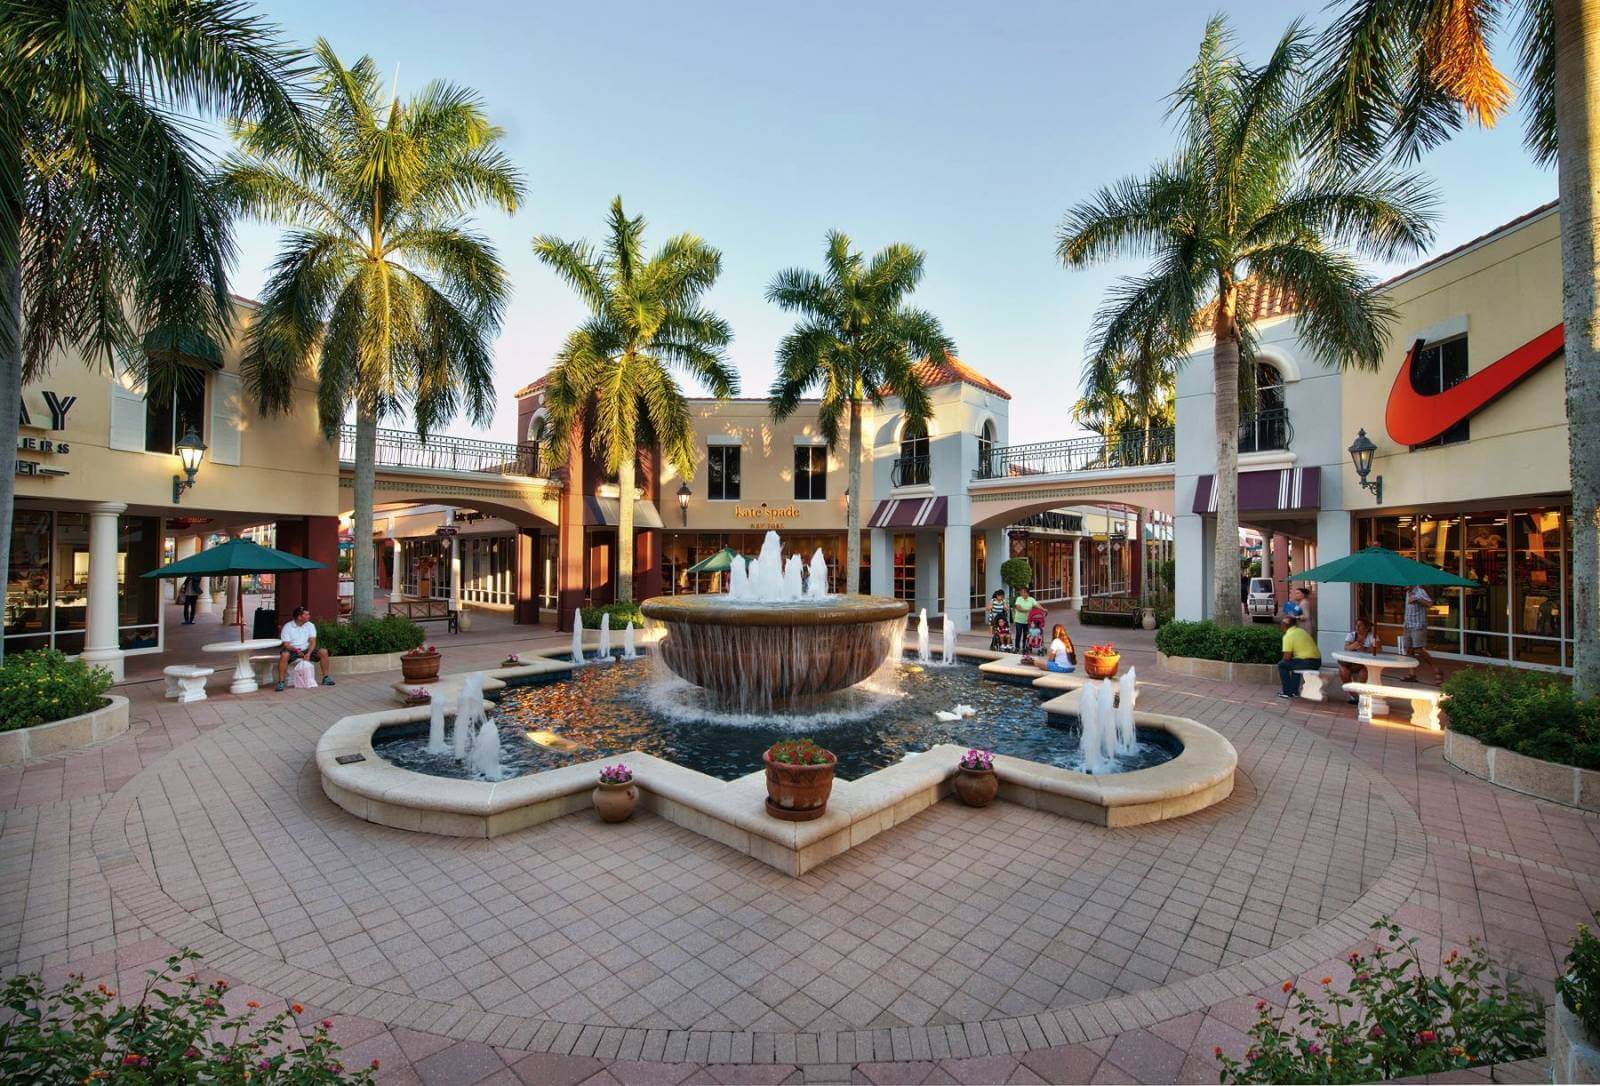 Miromar Outlets is a fantastic shopping plaza located on Corkscrew Road in Estero. Voted “Best Shopping Center” in Southwest Florida, this modern traffic-free mall has over 140 outlets by designer branded names where you can save up to 70% off the retail price. 